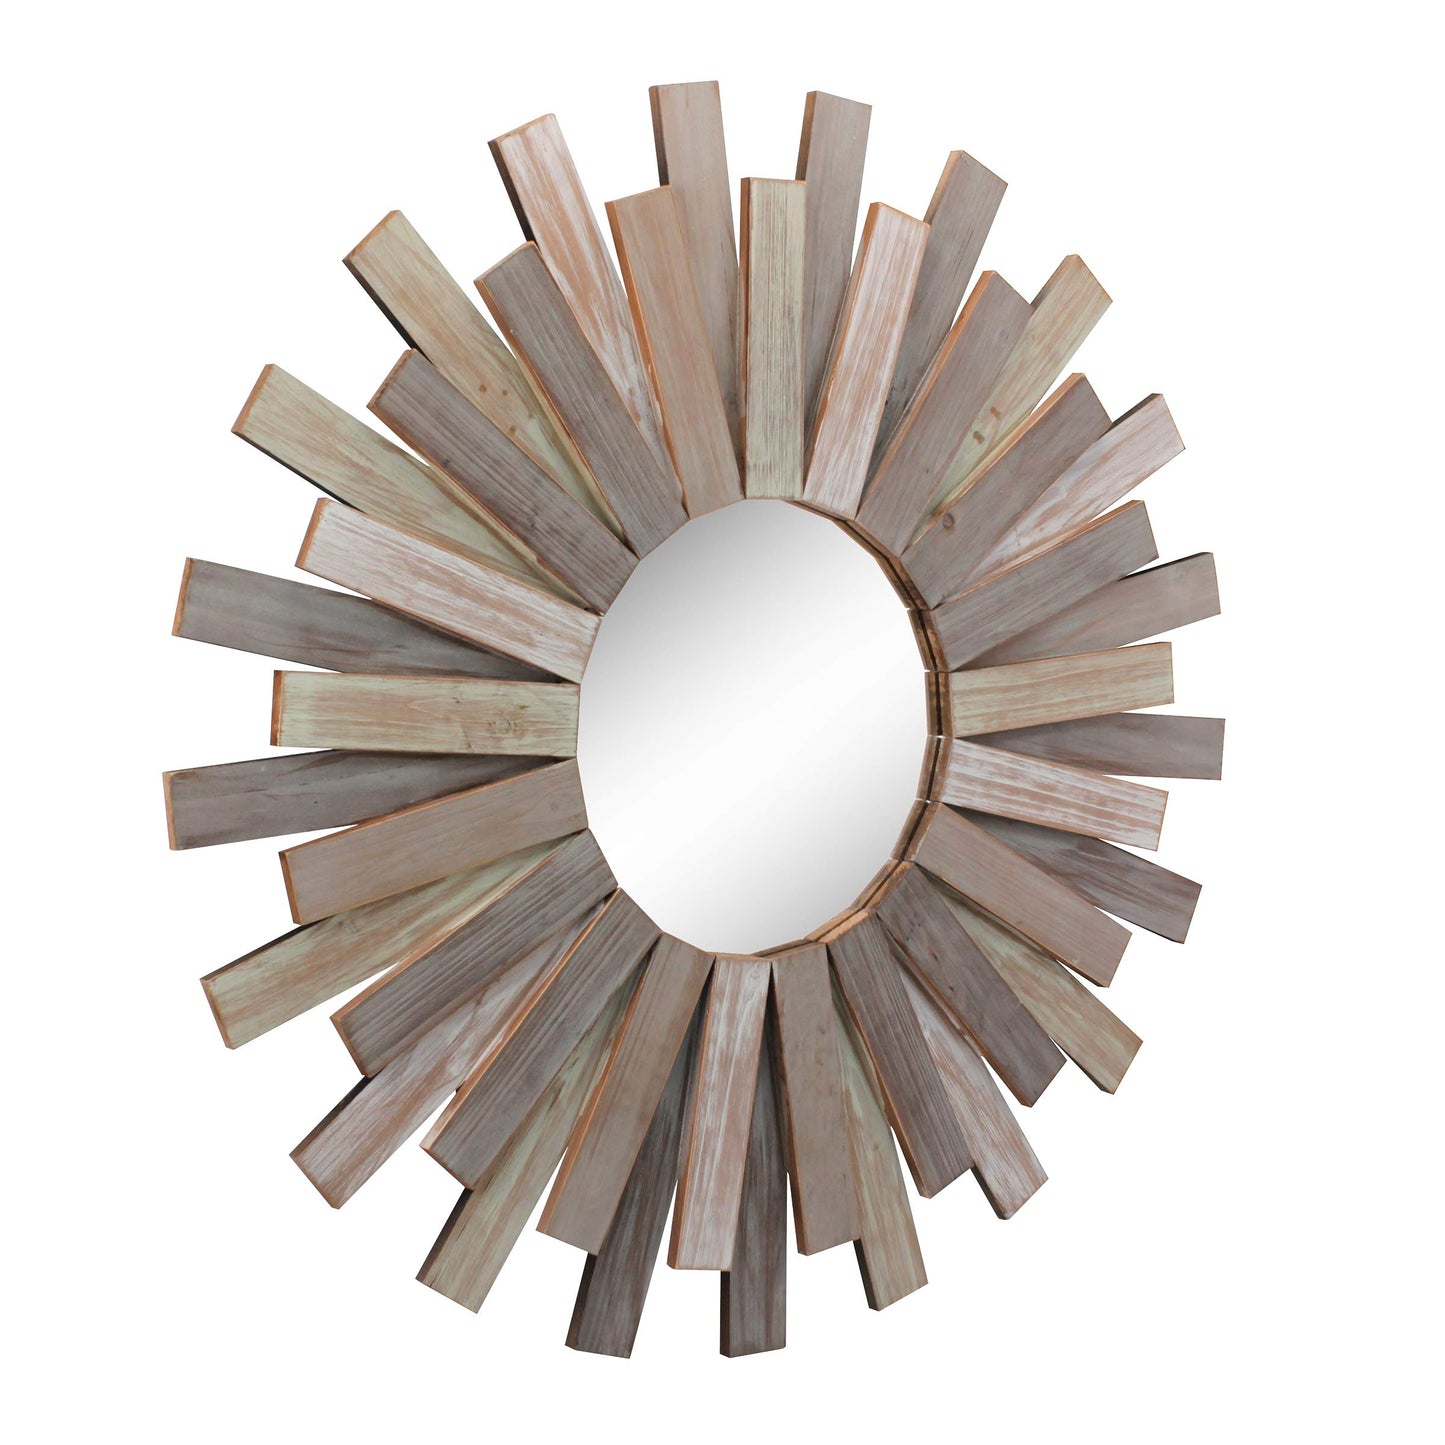 Stonebriar Large Round 32" Wooden Sunburst Wall Mirror with Attached Hanging Bracket, Decorative Rustic Decor for the Living Room, Bathroom, Bedroom, and Entryway, Multi Color